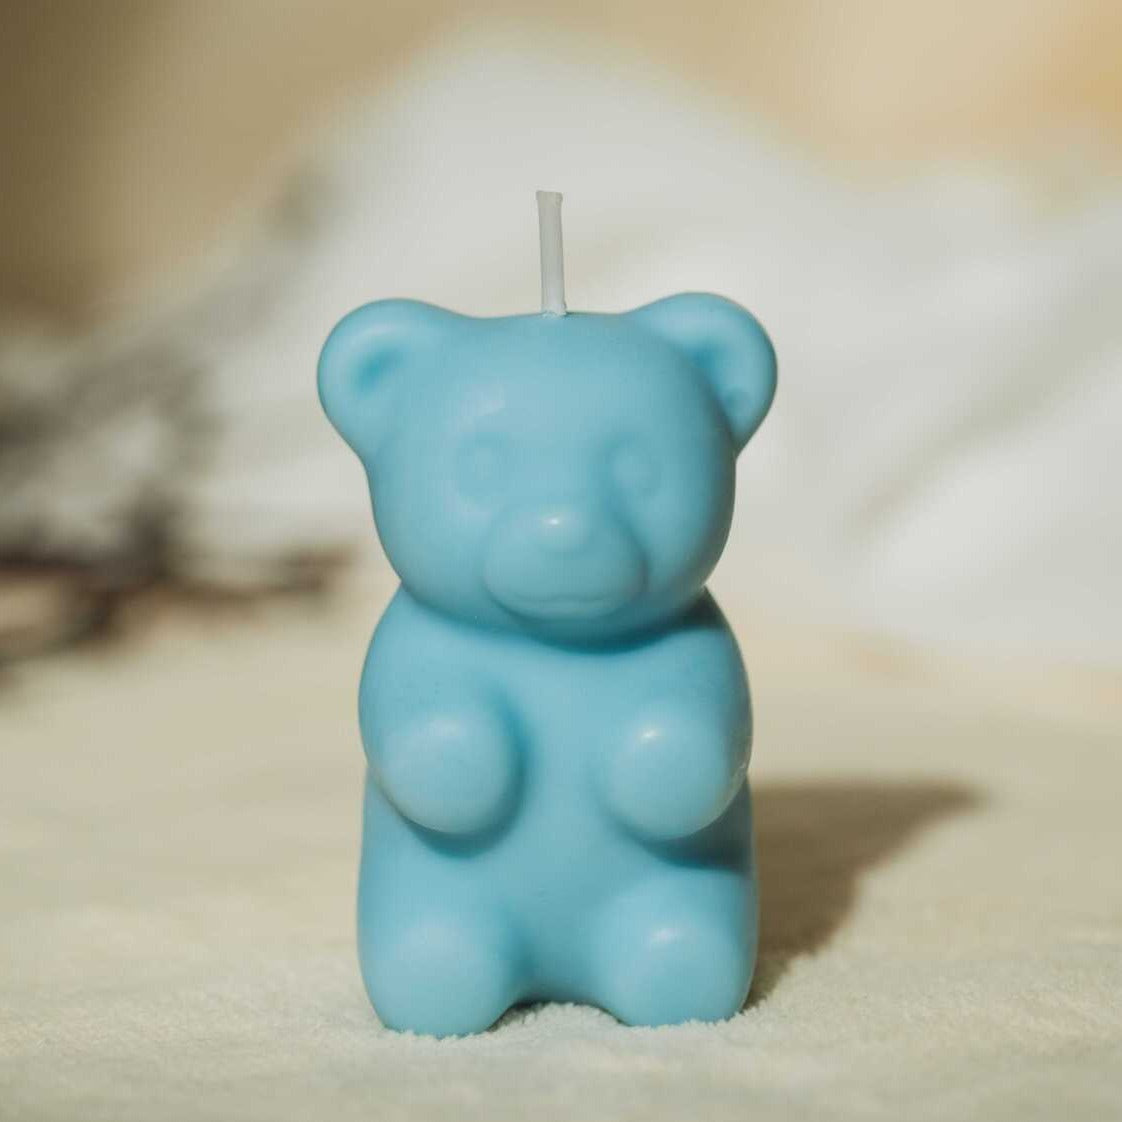 Gummy bear candles/Candle/figure/sculpture/candle 3d/scented/gift/home decor/art